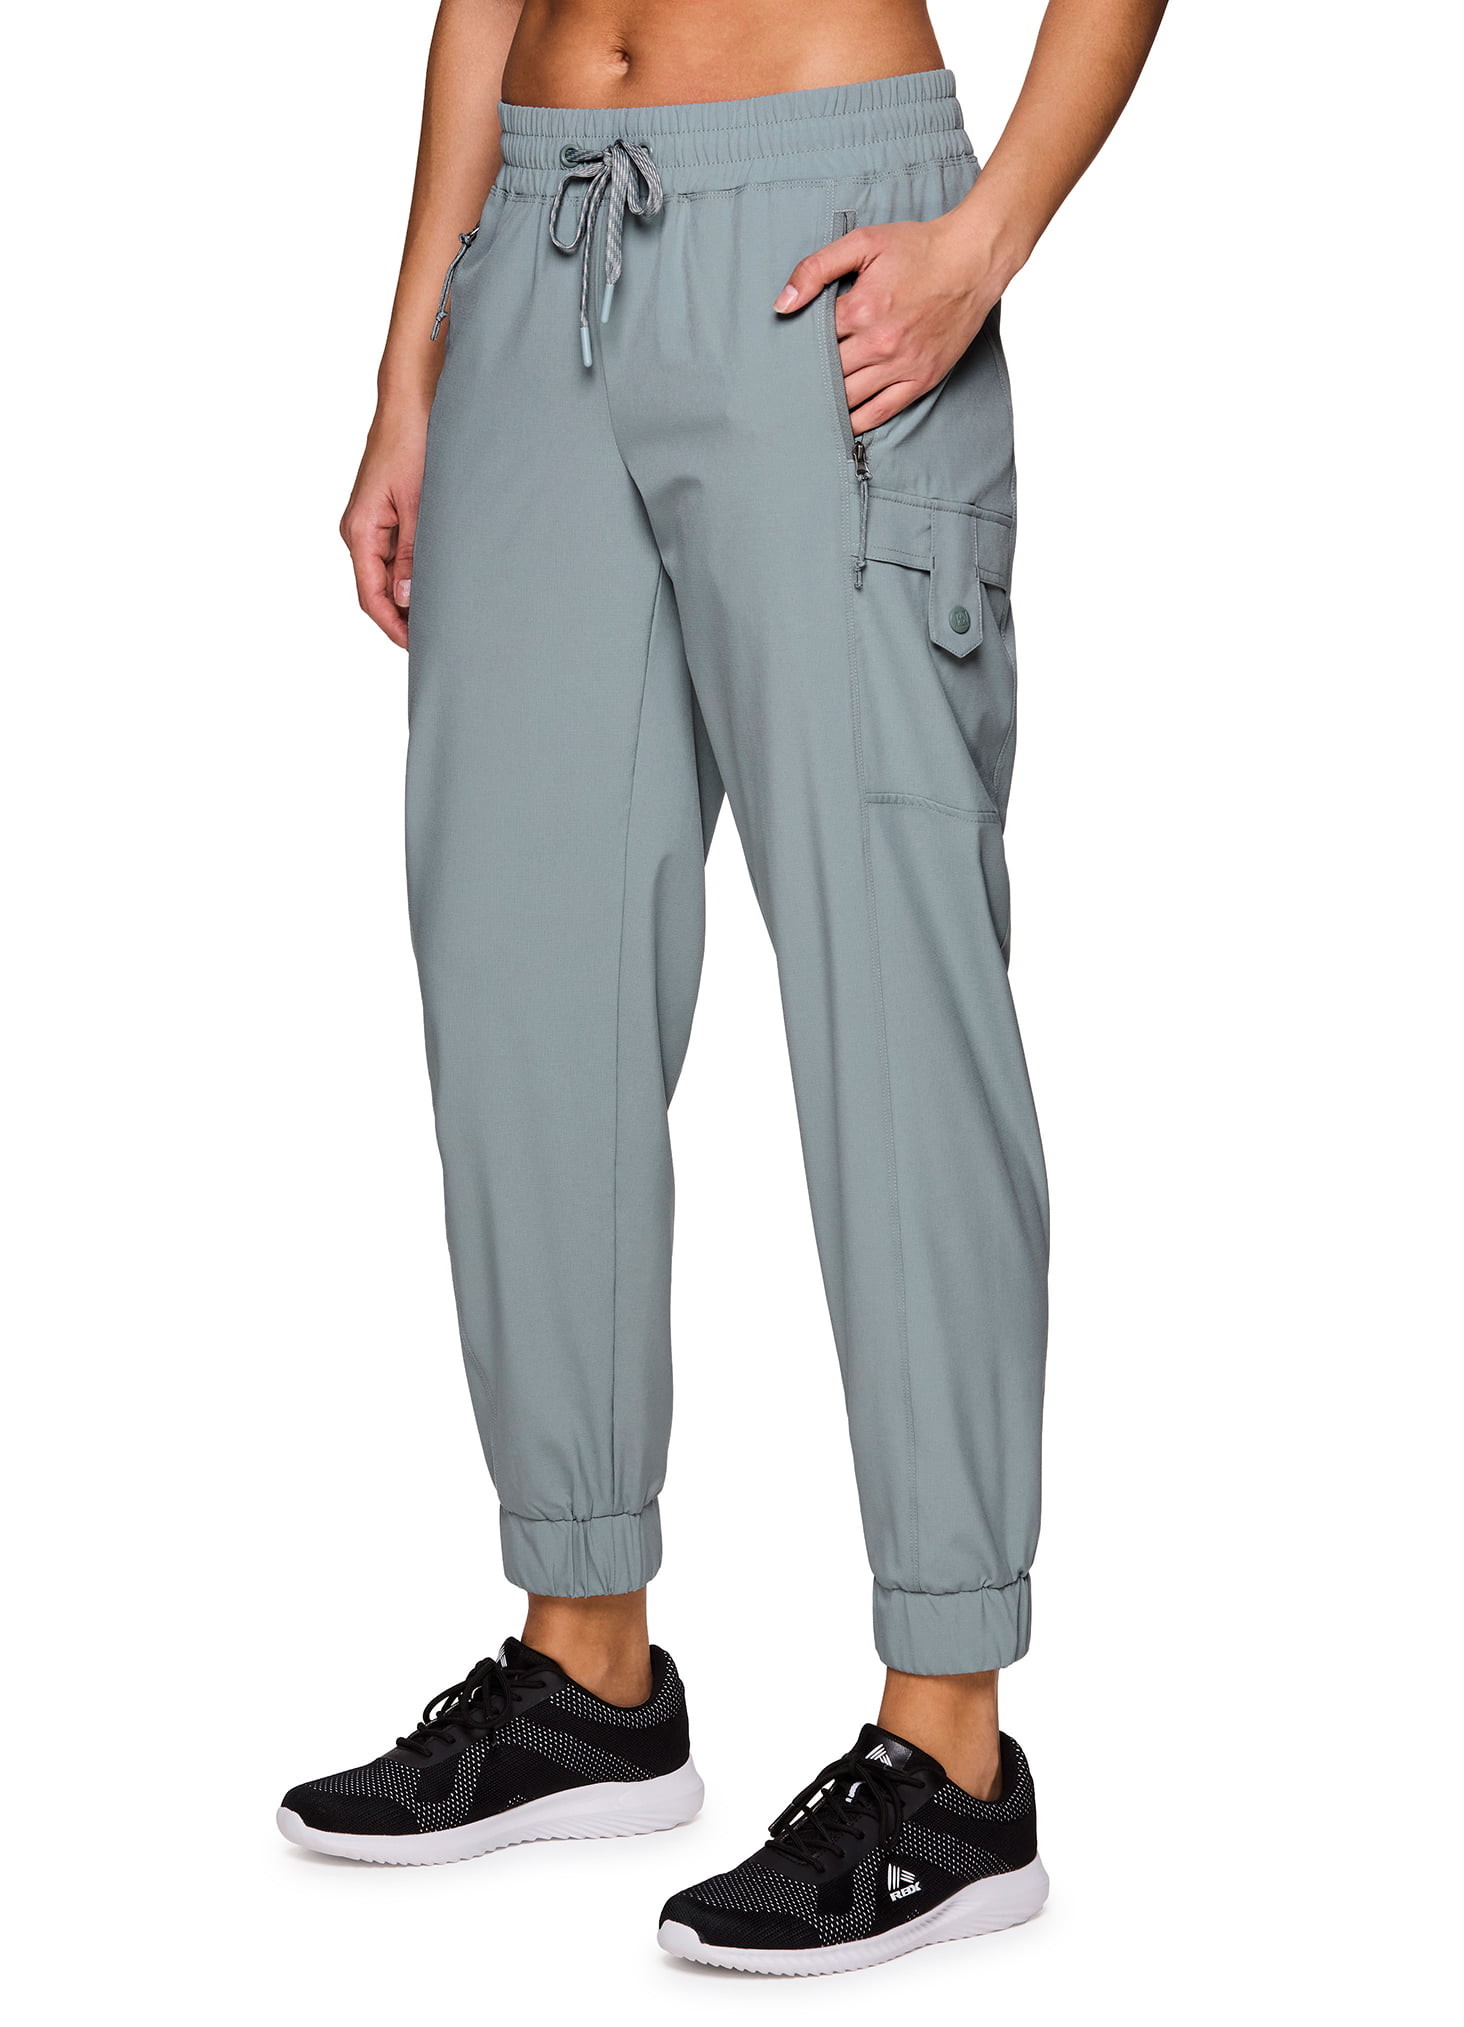 Avalanche Women's Woven Ripstop Cargo Jogger Pants With Zipper Pockets ...